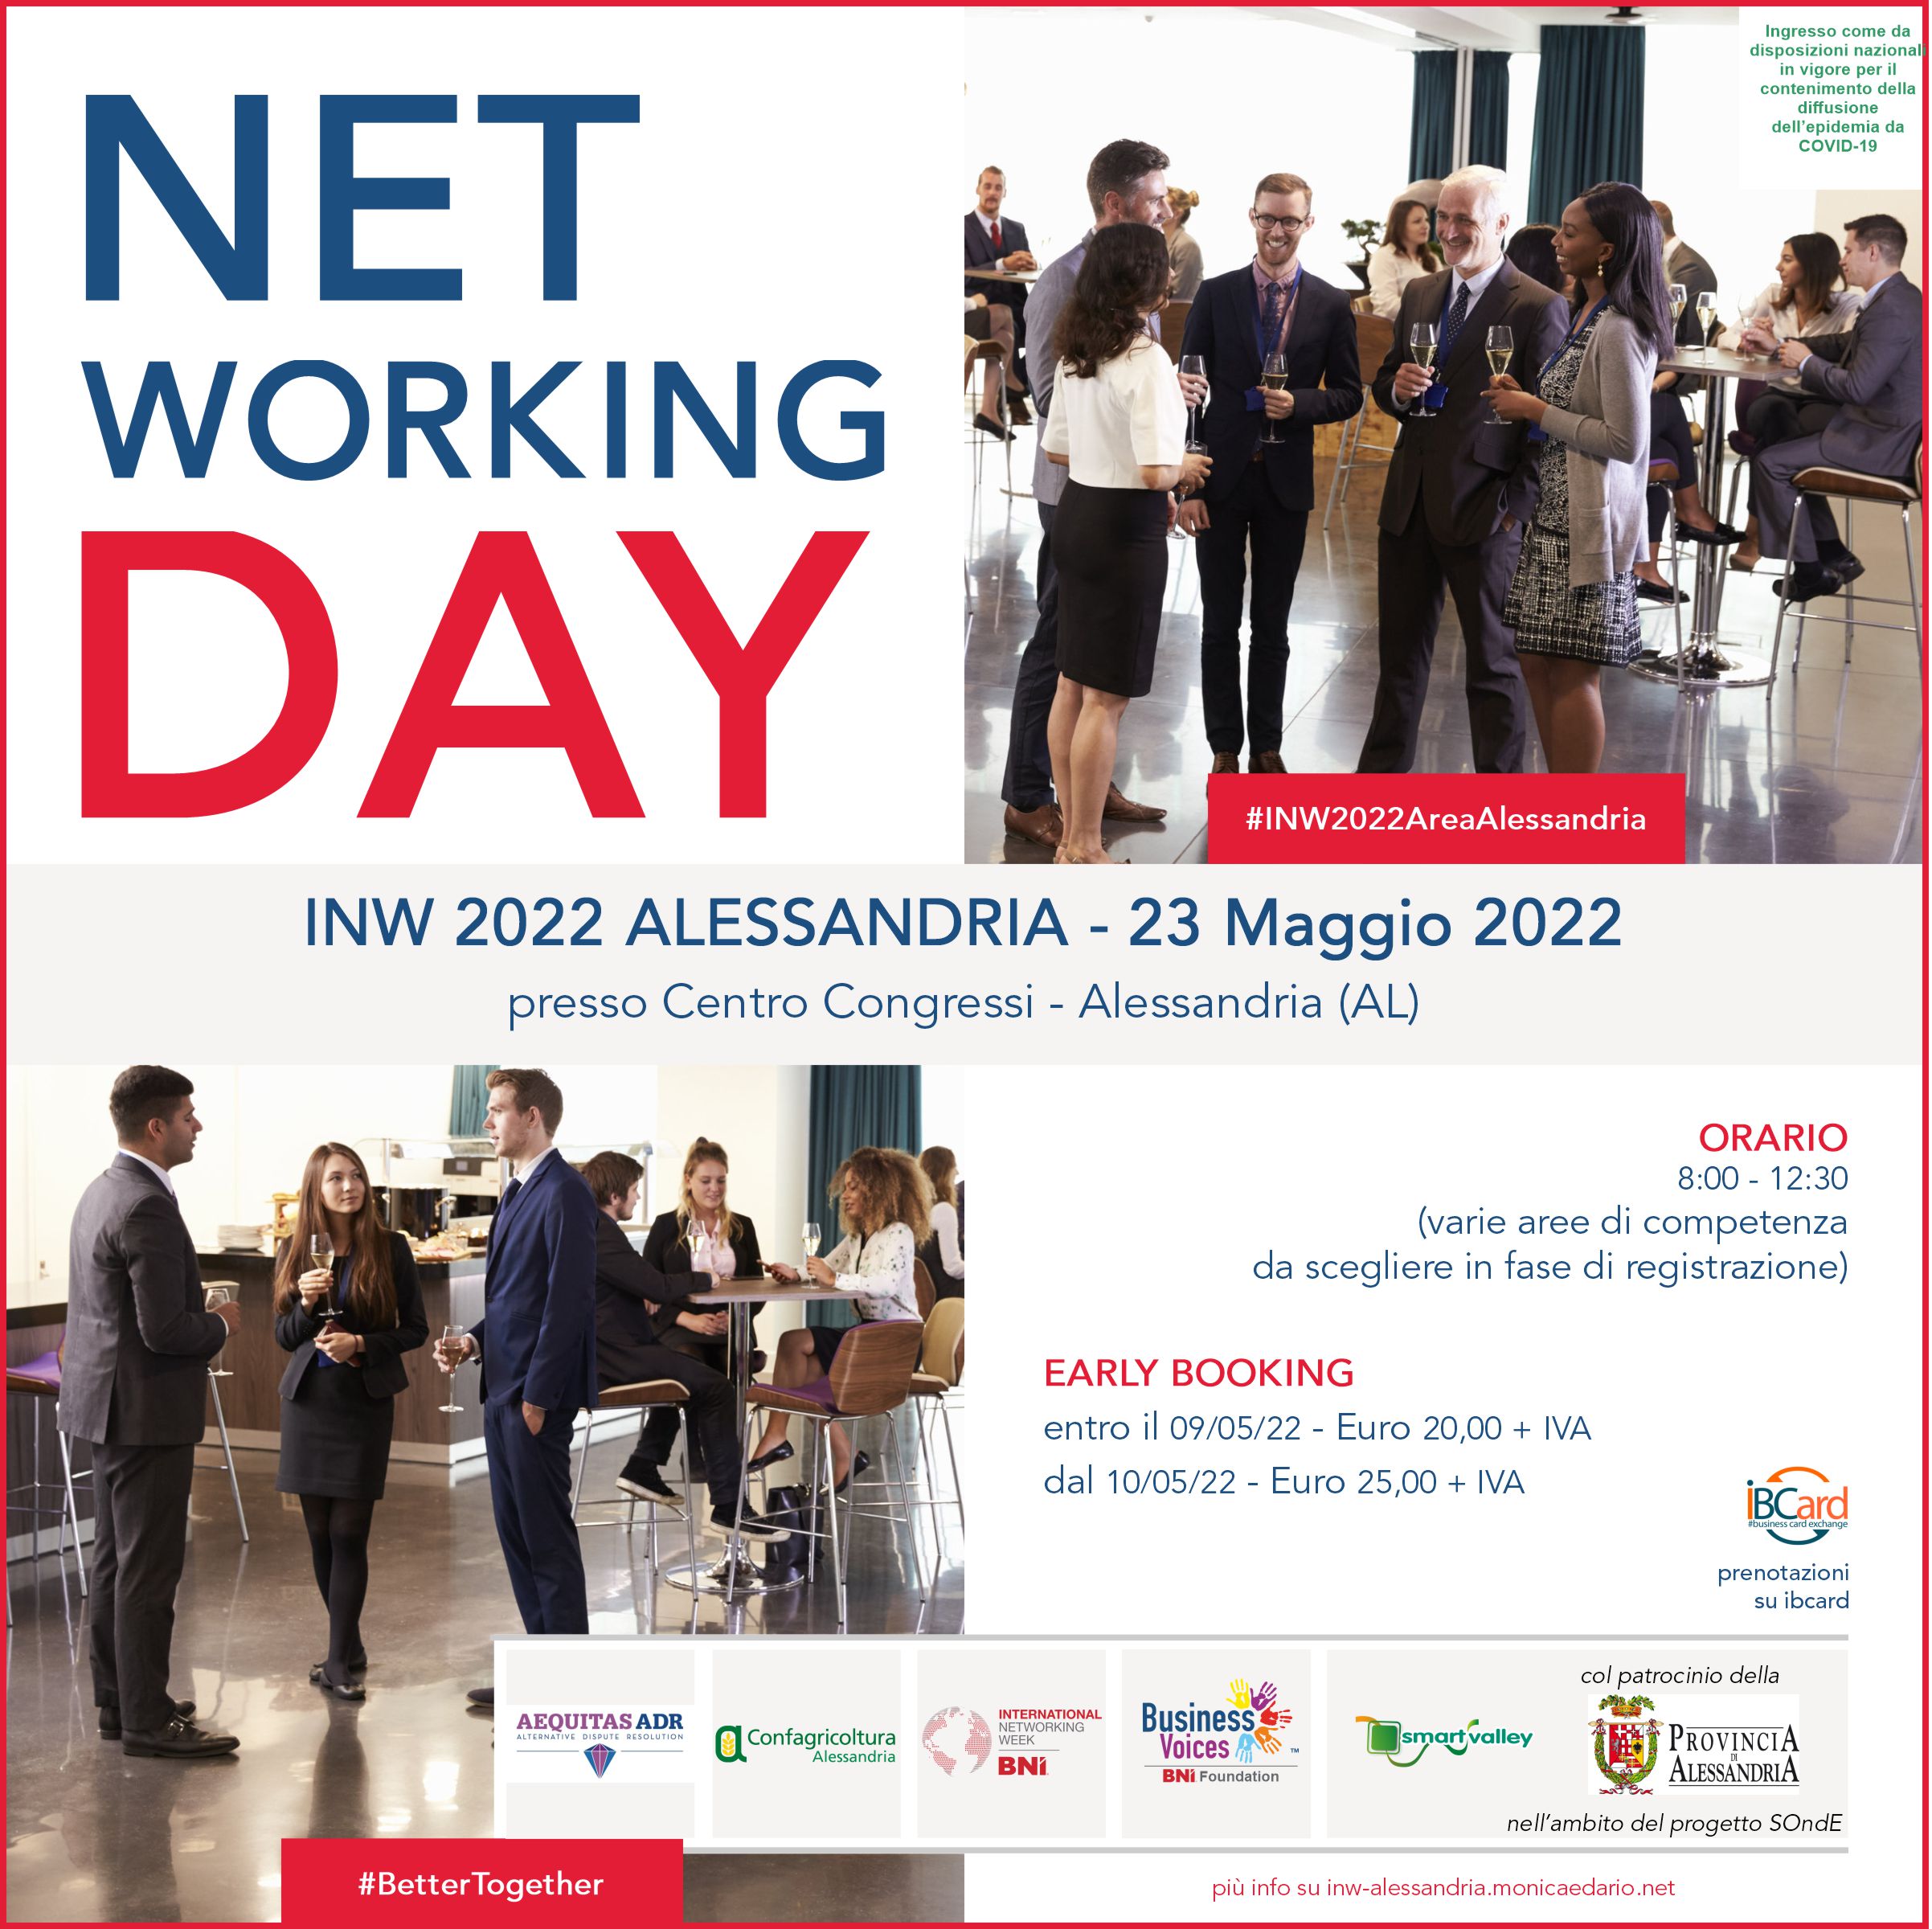 Networking Day - INW2022 Alessandria